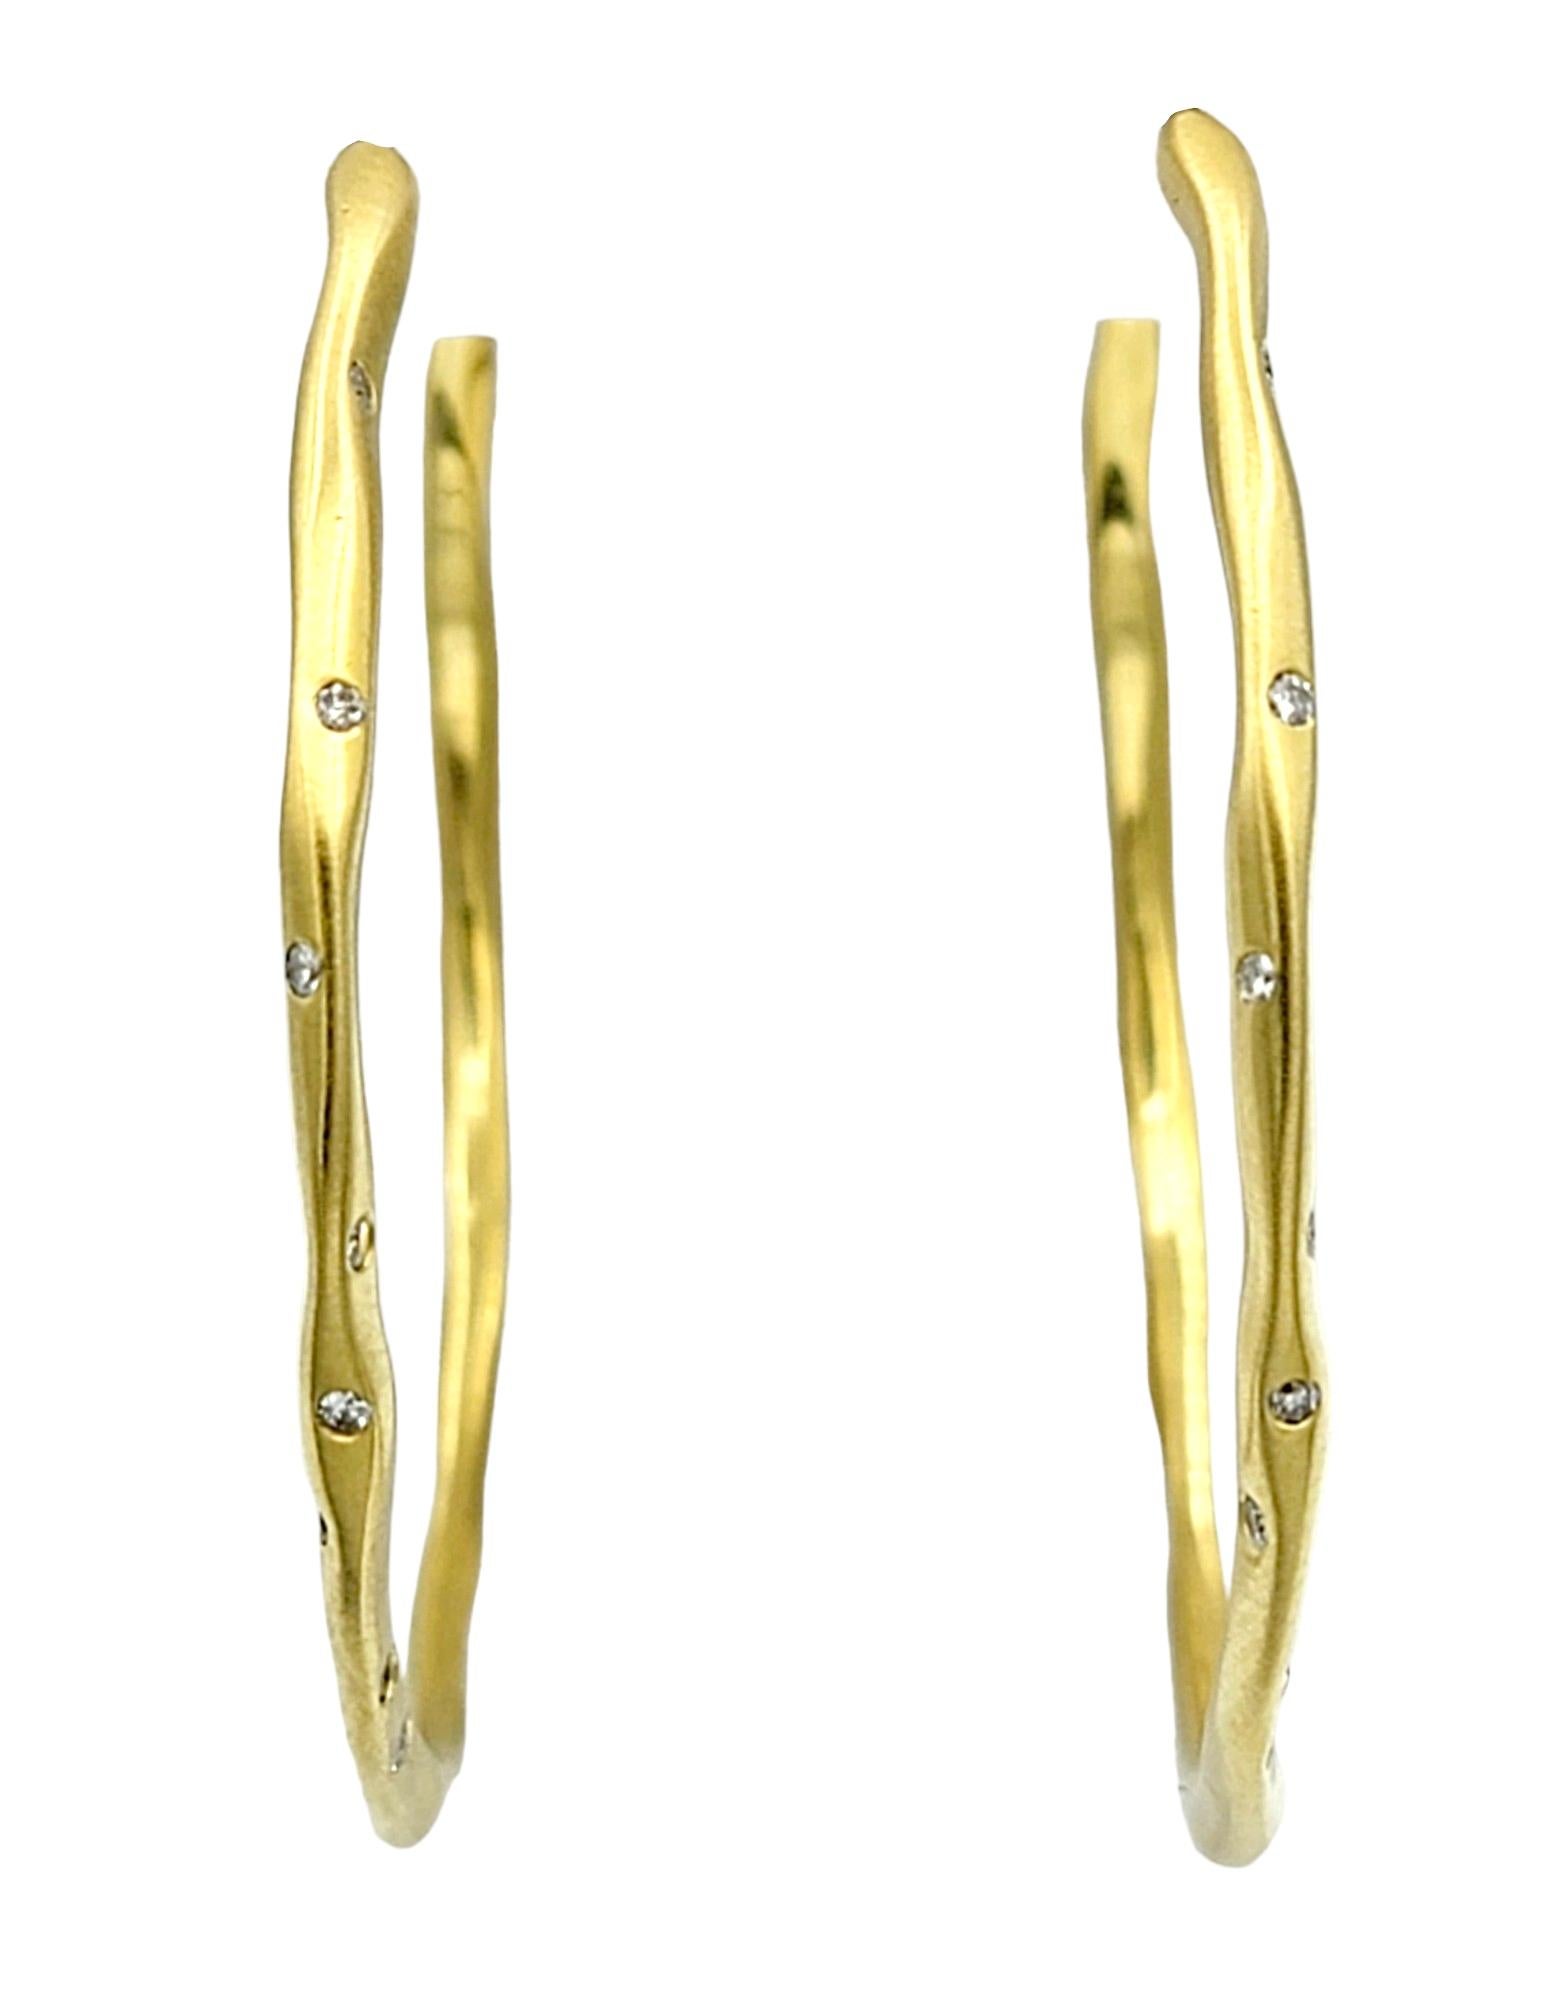 Hammered 18 Karat Yellow Gold Brushed Finish Hoop Earrings with Round Diamonds For Sale